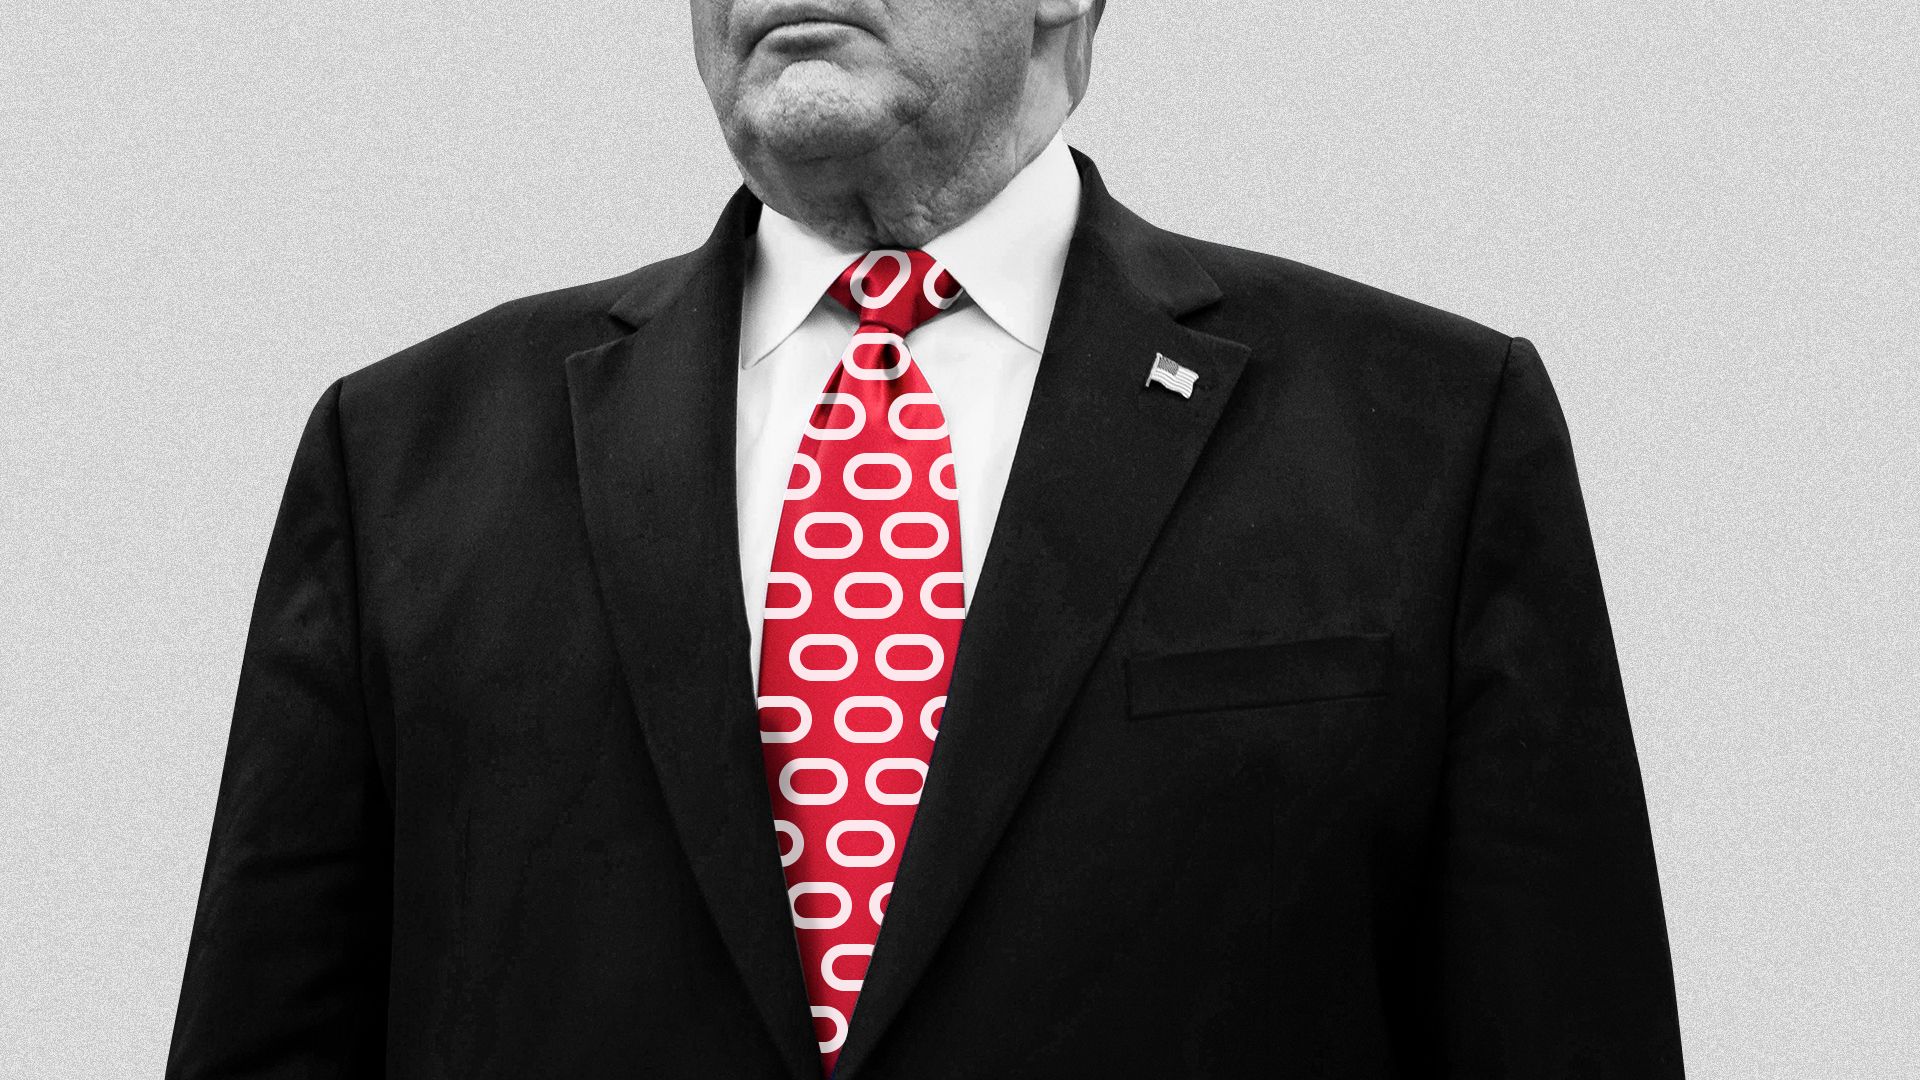 Illustration of President Trump with the Oracle logo's "O" printed on his tie as if it were a pattern.